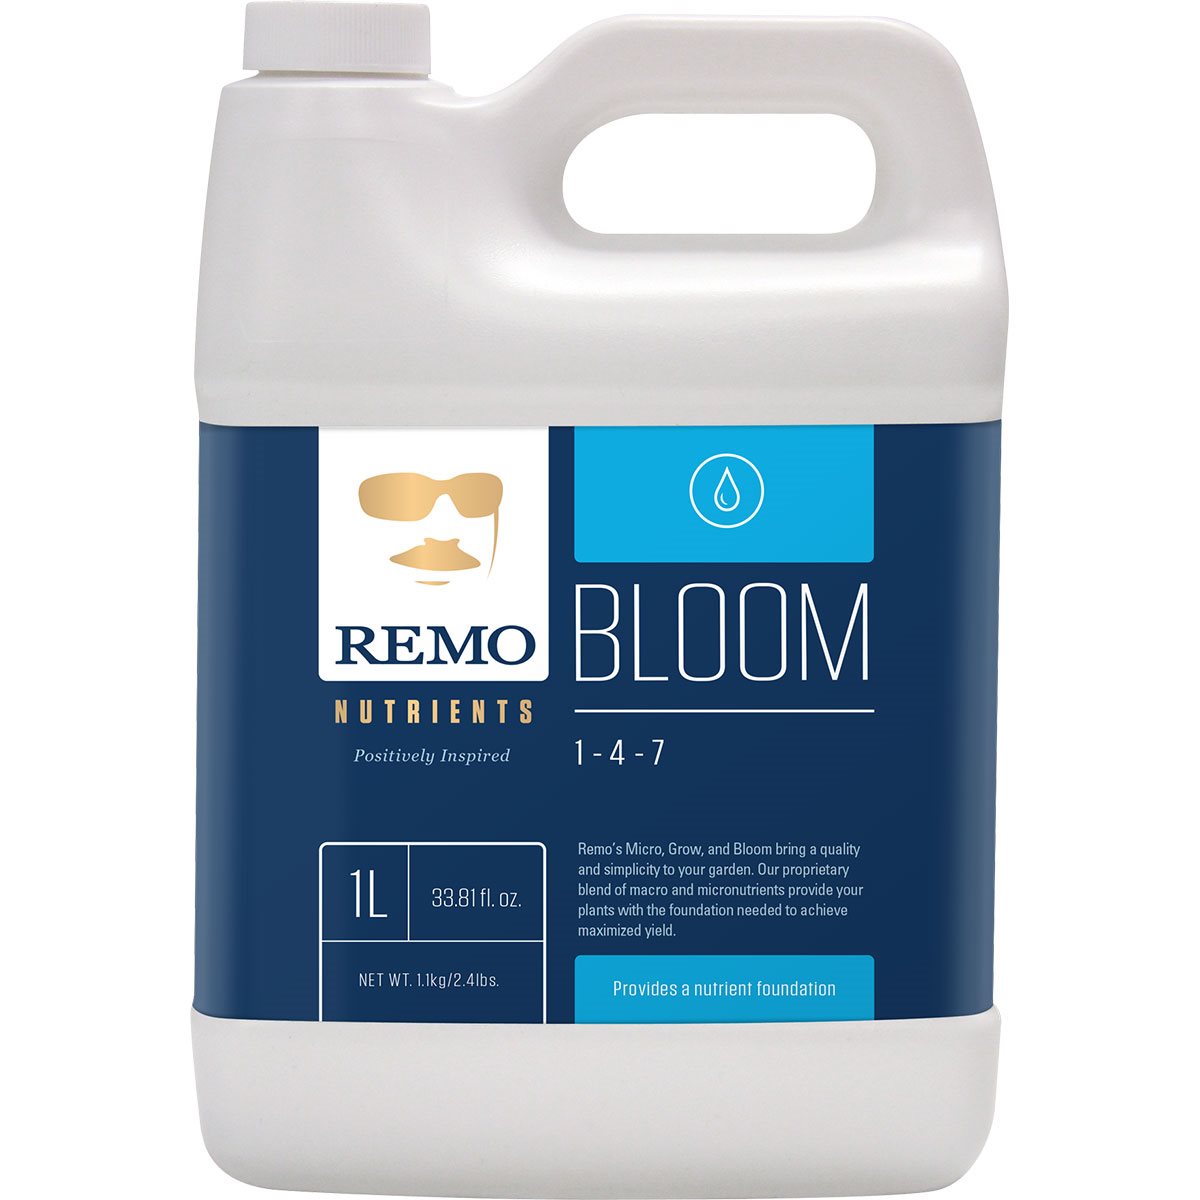 Product Image:Remo Nutrients Bloom (1-4-7)